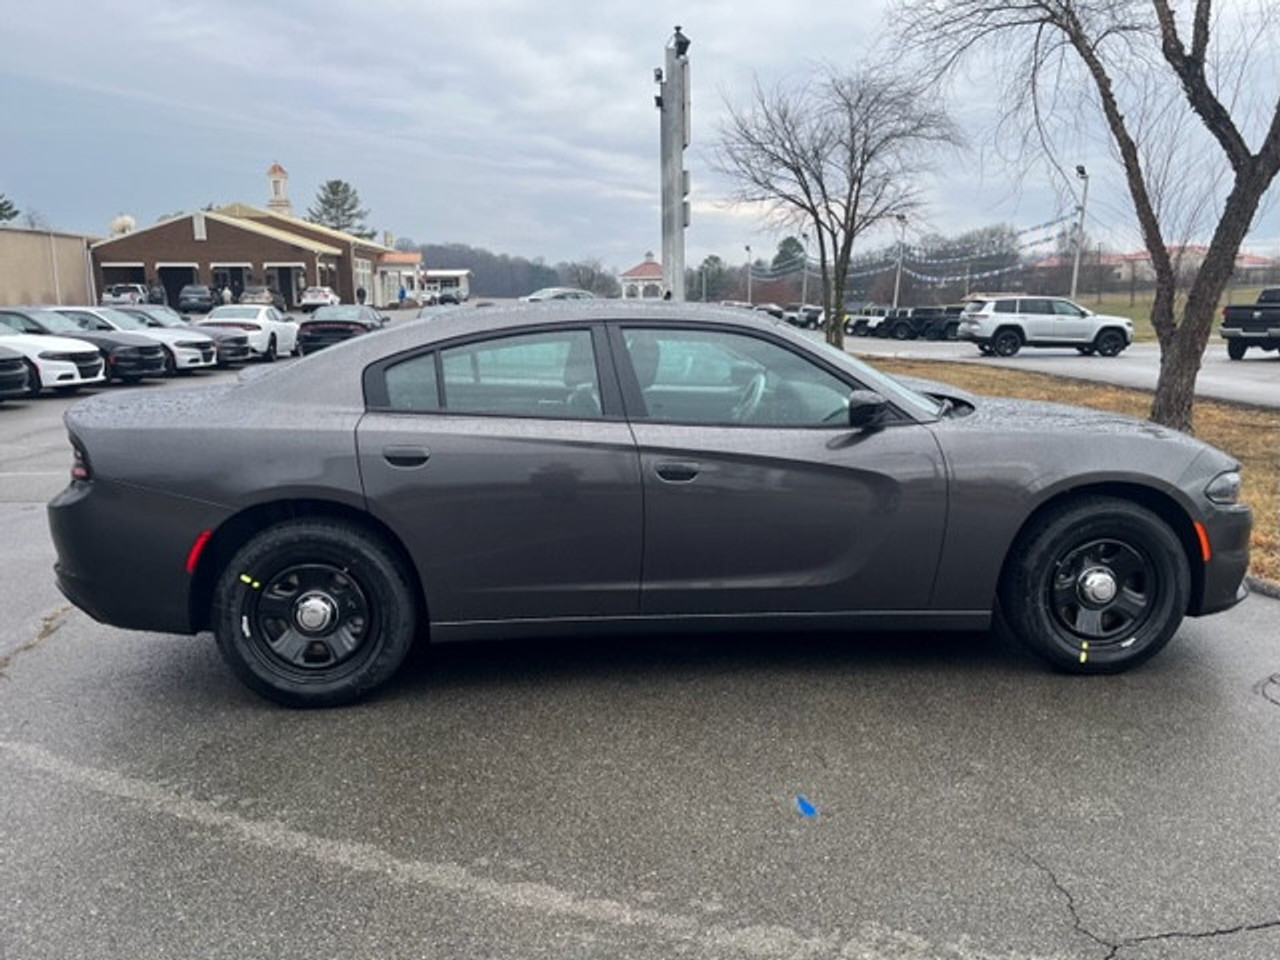 New 2023 Gray Dodge Charger PPV V8 RWD ready to be built as a Marked Patrol Package Police Pursuit Car (Emergency Lighting, Siren, Controller, Partition, Window Bars, etc.), + Delivery, G5